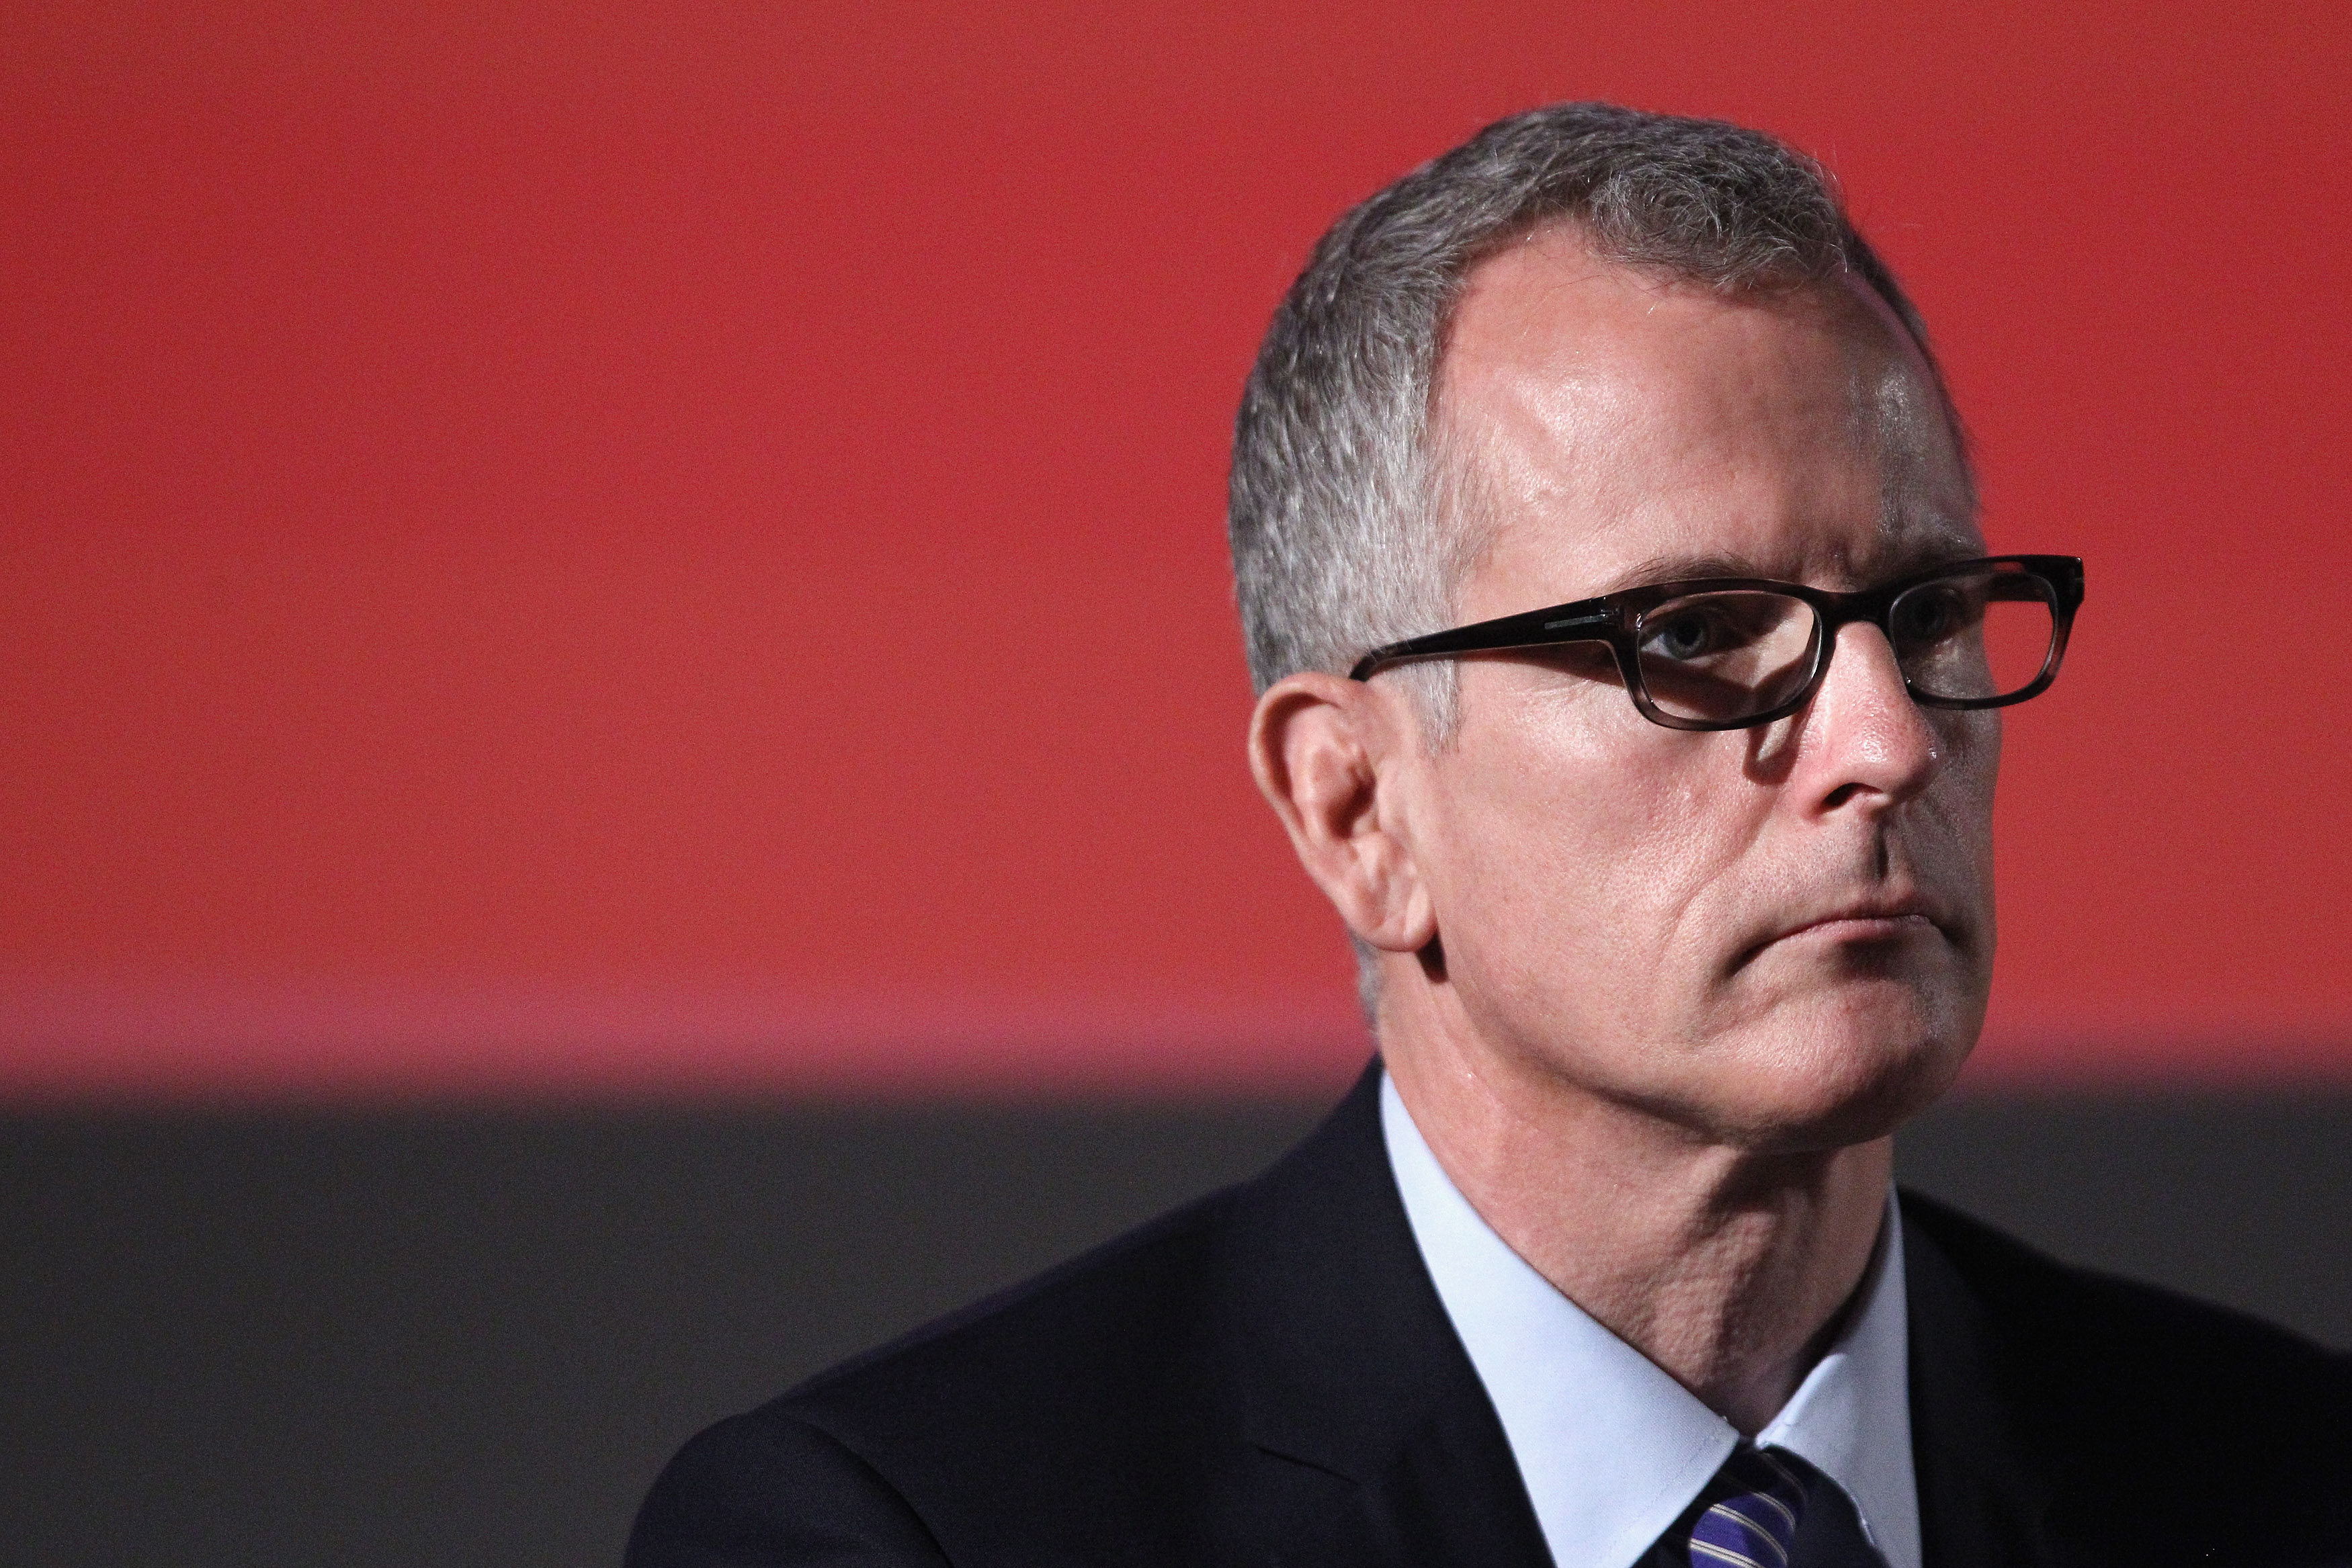 Brian Paddick, a former Deputy Assistant Commissioner for the Metropolitan Police and Liberal Democrat candidate for Mayor, during a Mayoral hustings in April 2012 (Oli Scarff—Getty Images)